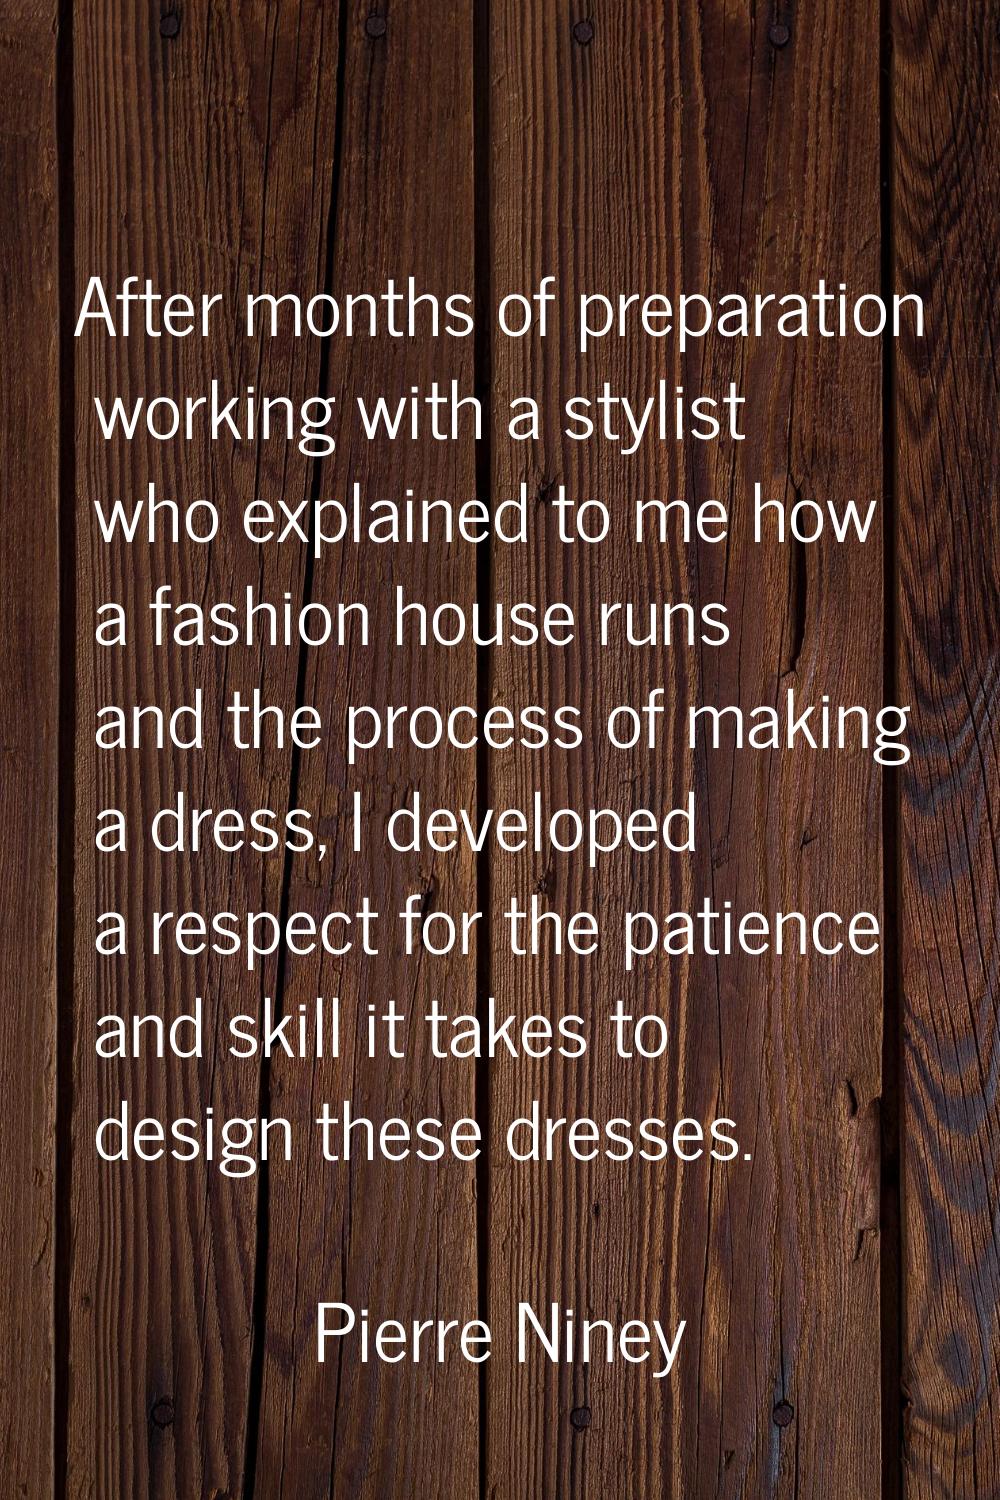 After months of preparation working with a stylist who explained to me how a fashion house runs and